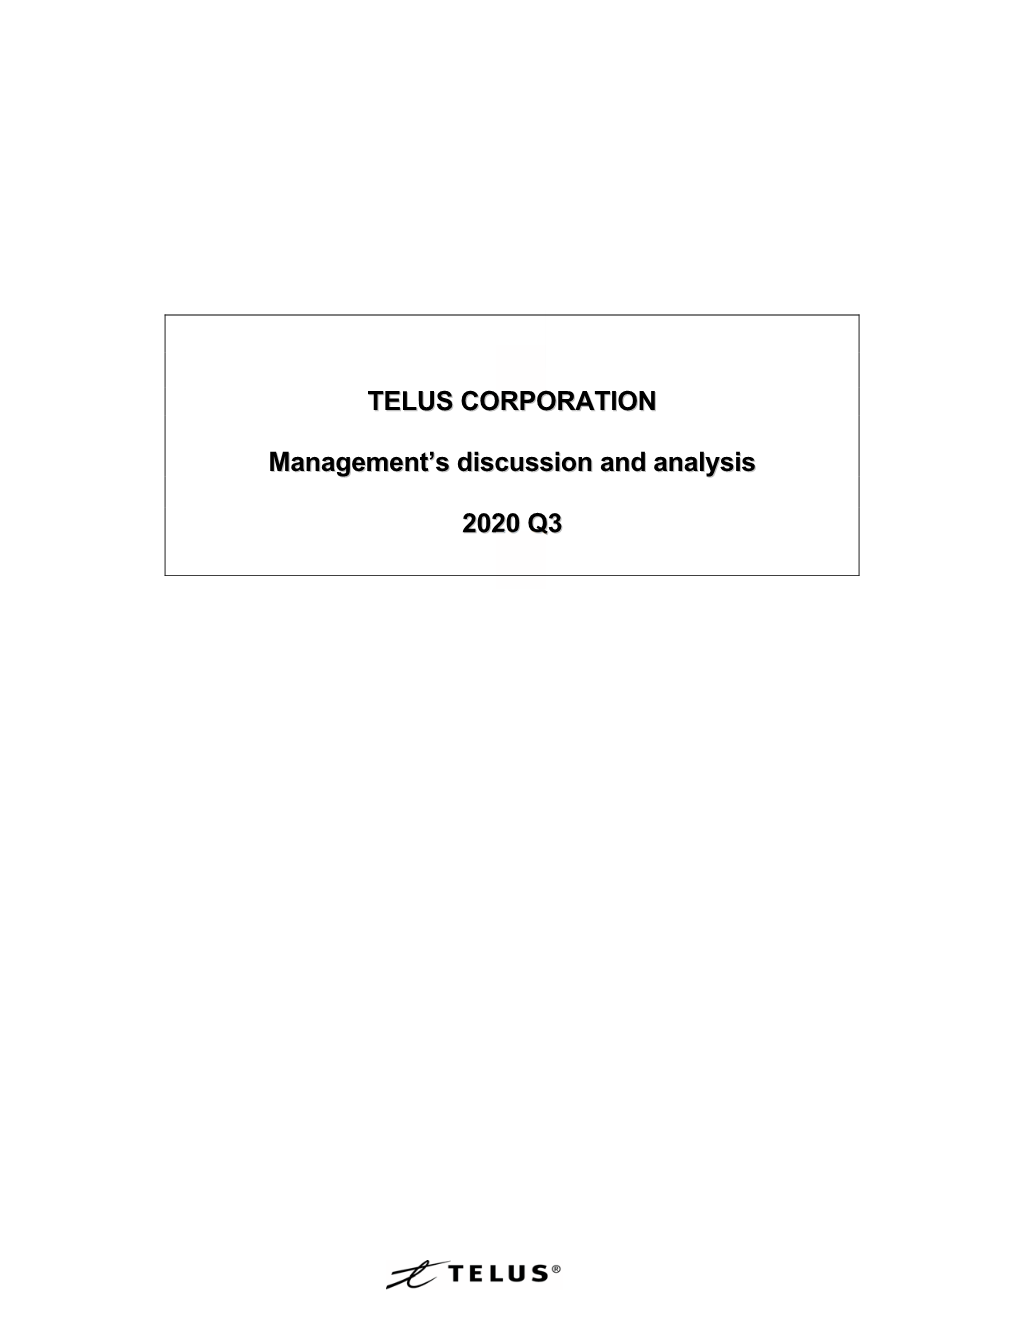 TELUS CORPORATION Management's Discussion And